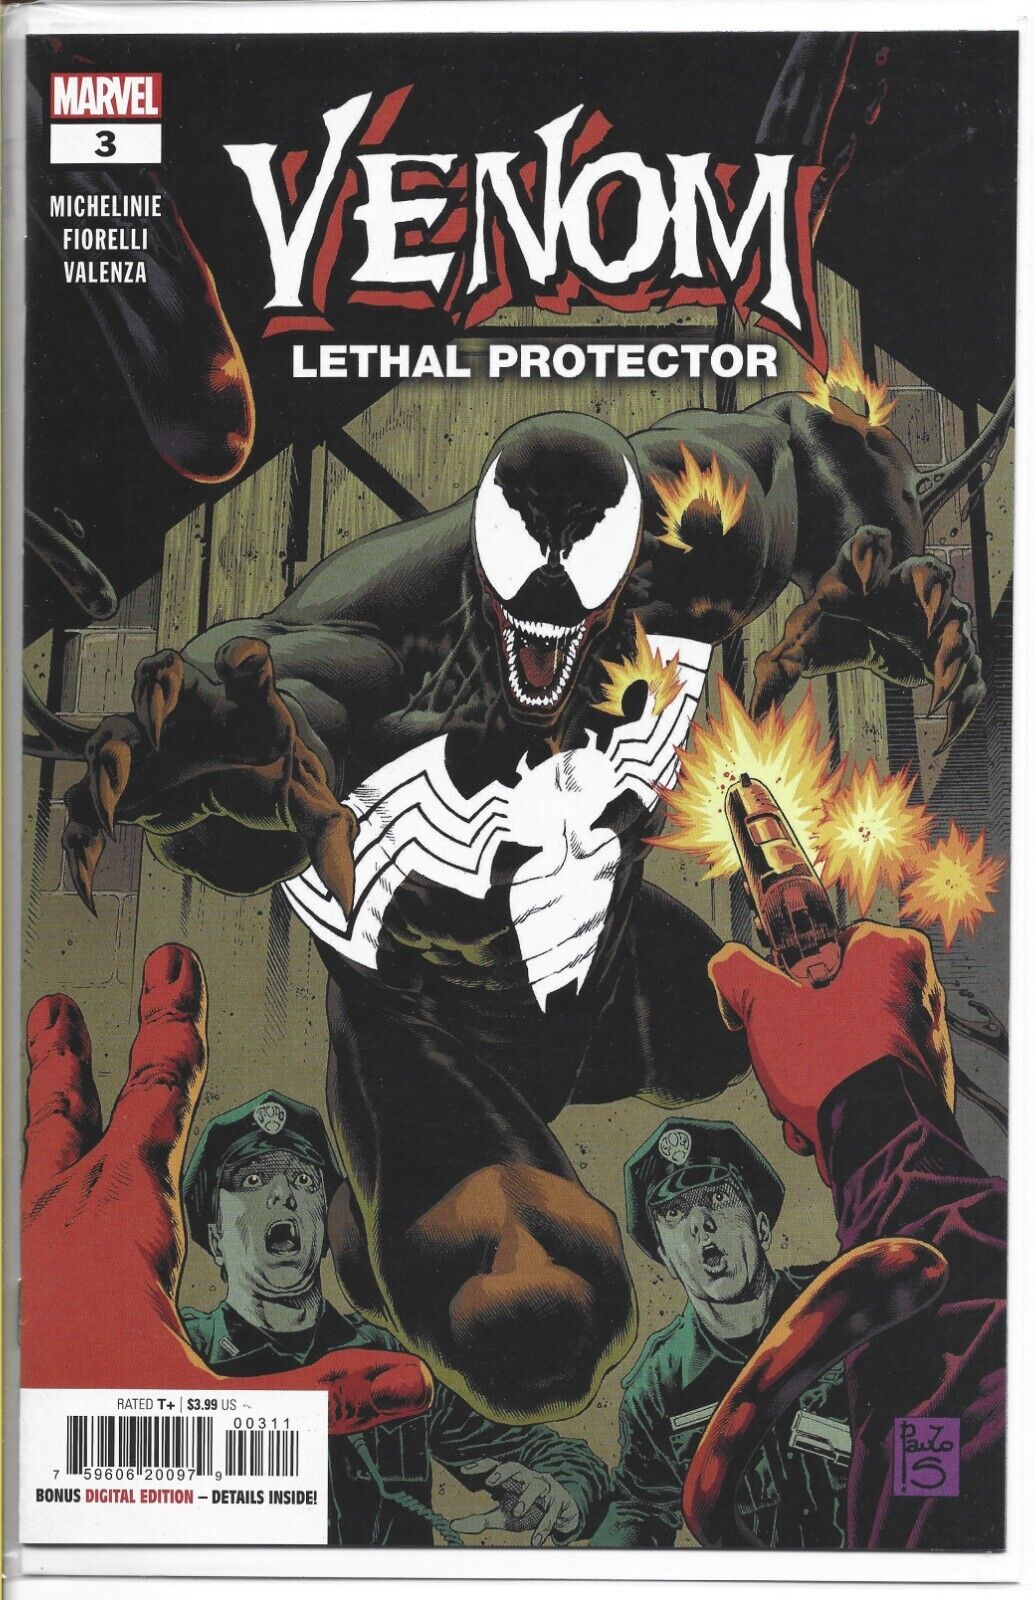 VENOM LETHAL PROTECTOR #3 MARVEL COMICS 2022 NEW UNREAD BAGGED AND BOARDED